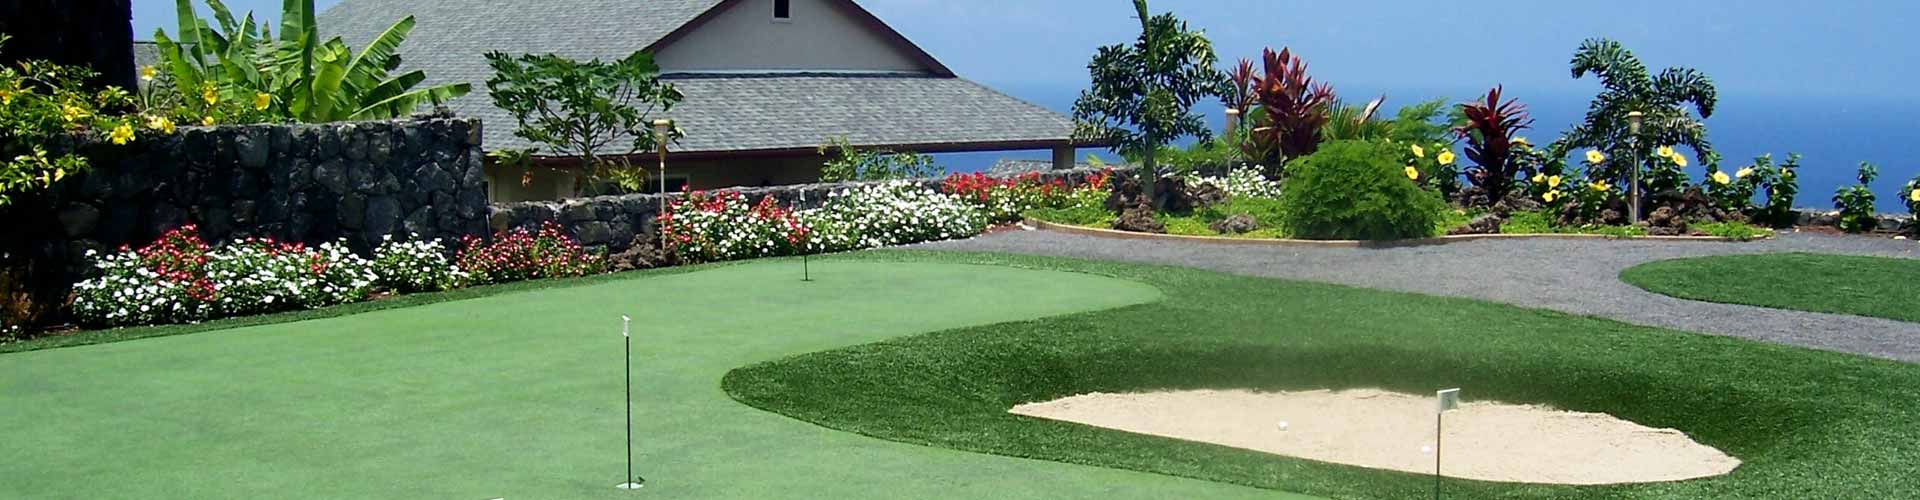 Artificial grass installation with putting greens in Hawaii